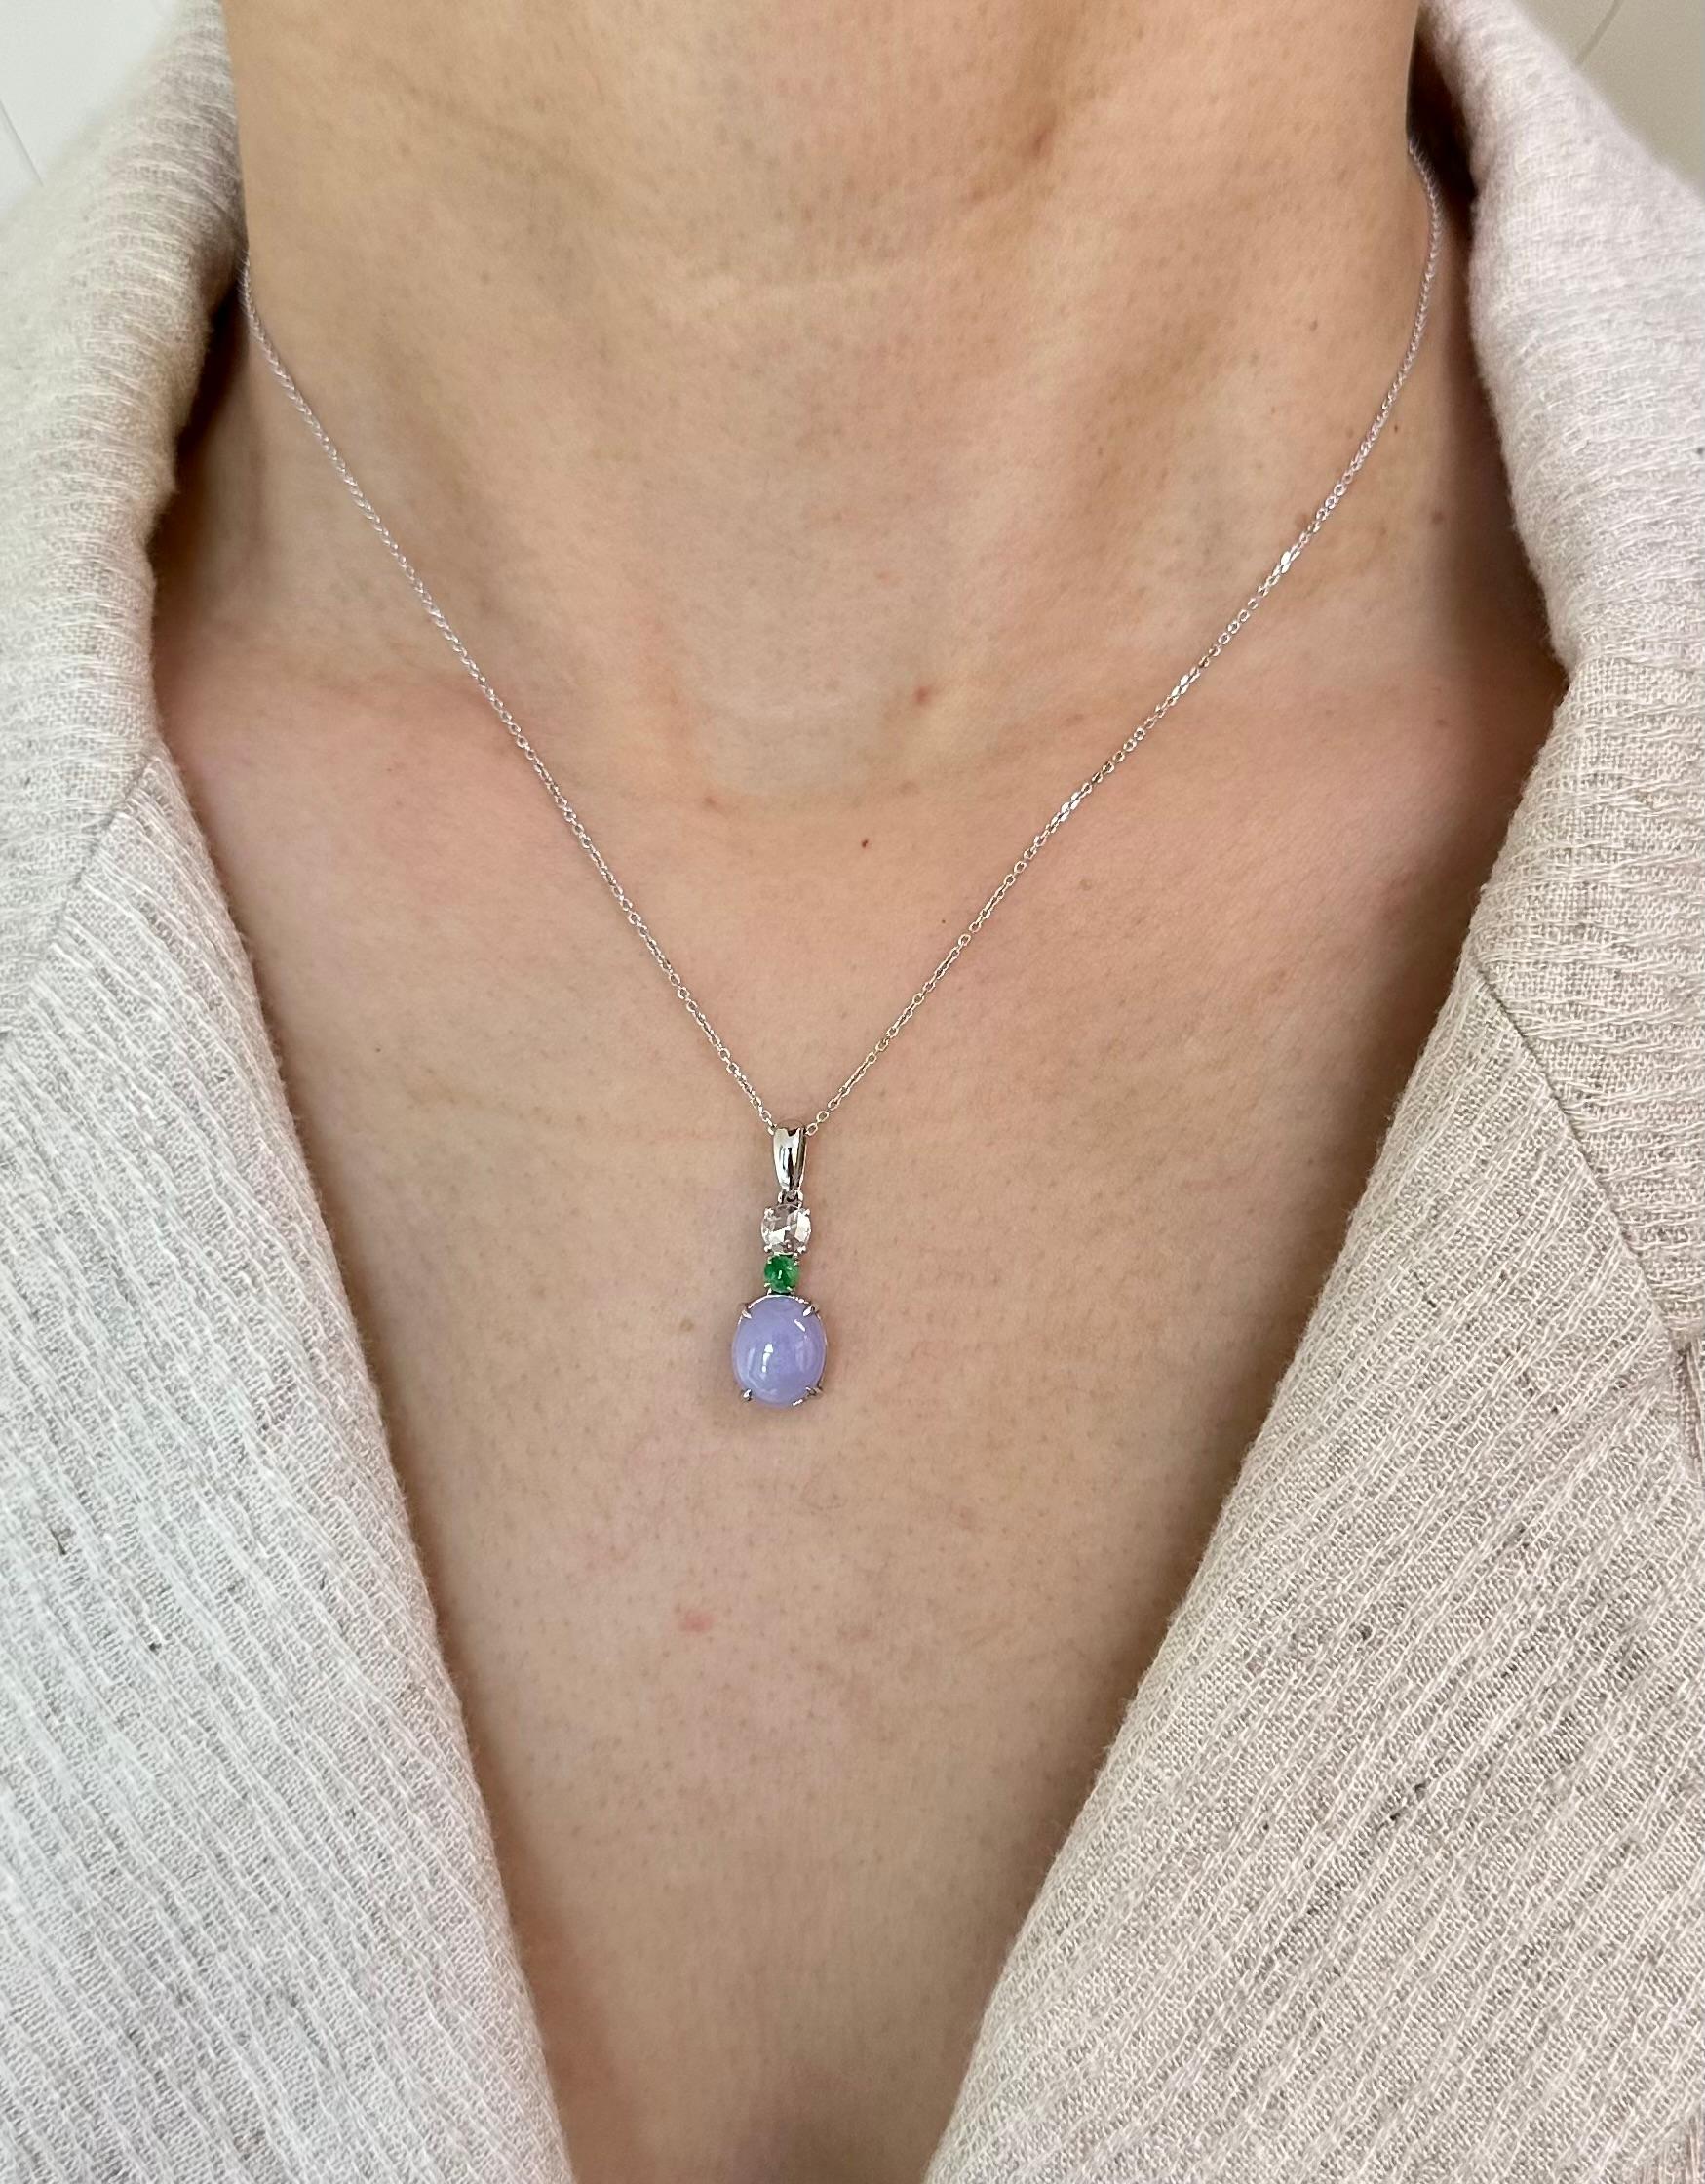 Please check out the HD video! The Jade is certified to be natural. The pendant is set in 18k white gold with one rose cut diamond. The diamond weights 0.17 cts. The untreated / un-enhanced natural lavender jade is translucent. The color is a